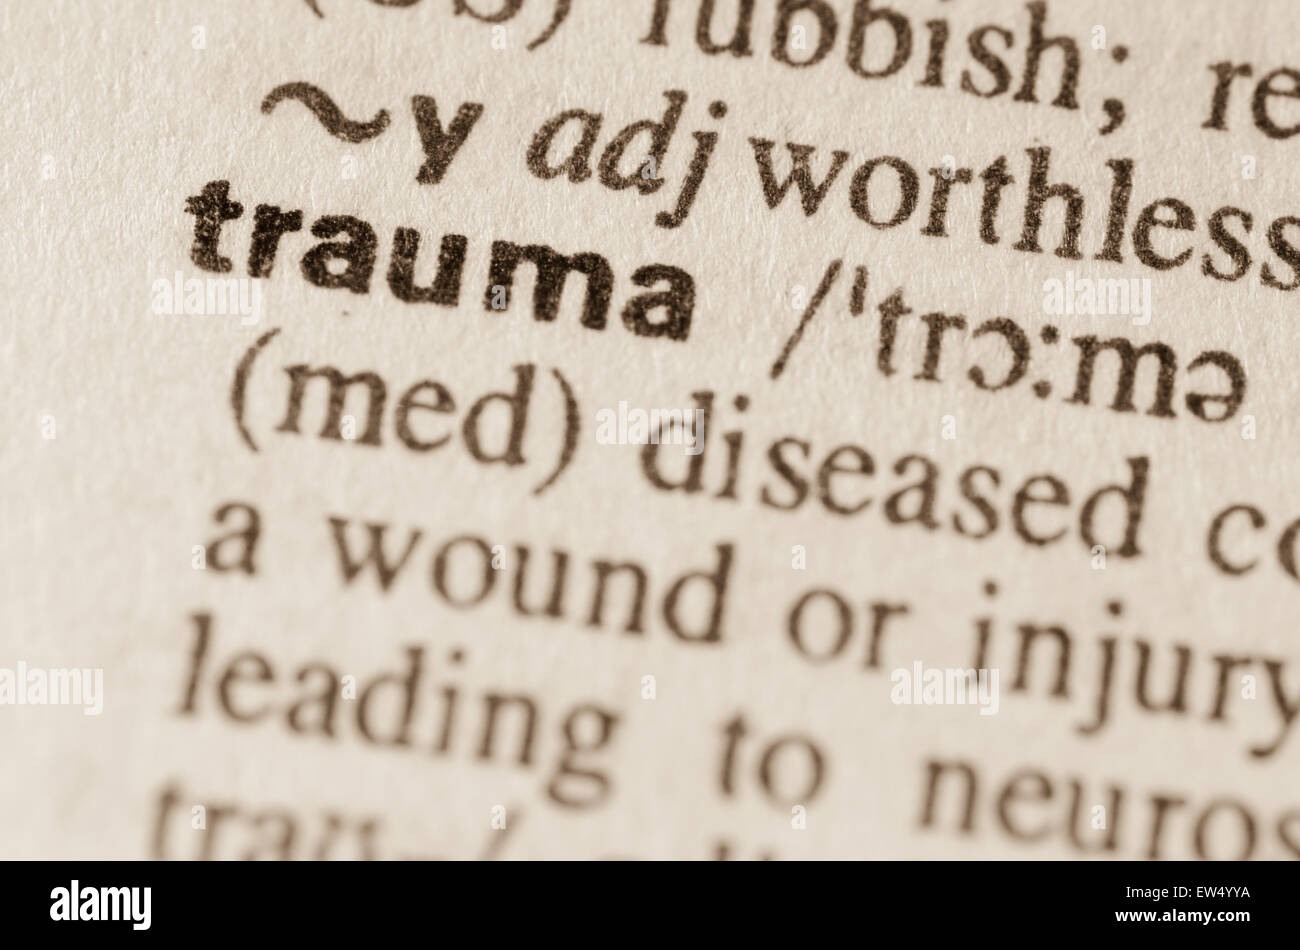 Definition of word trauma in dictionary Stock Photo